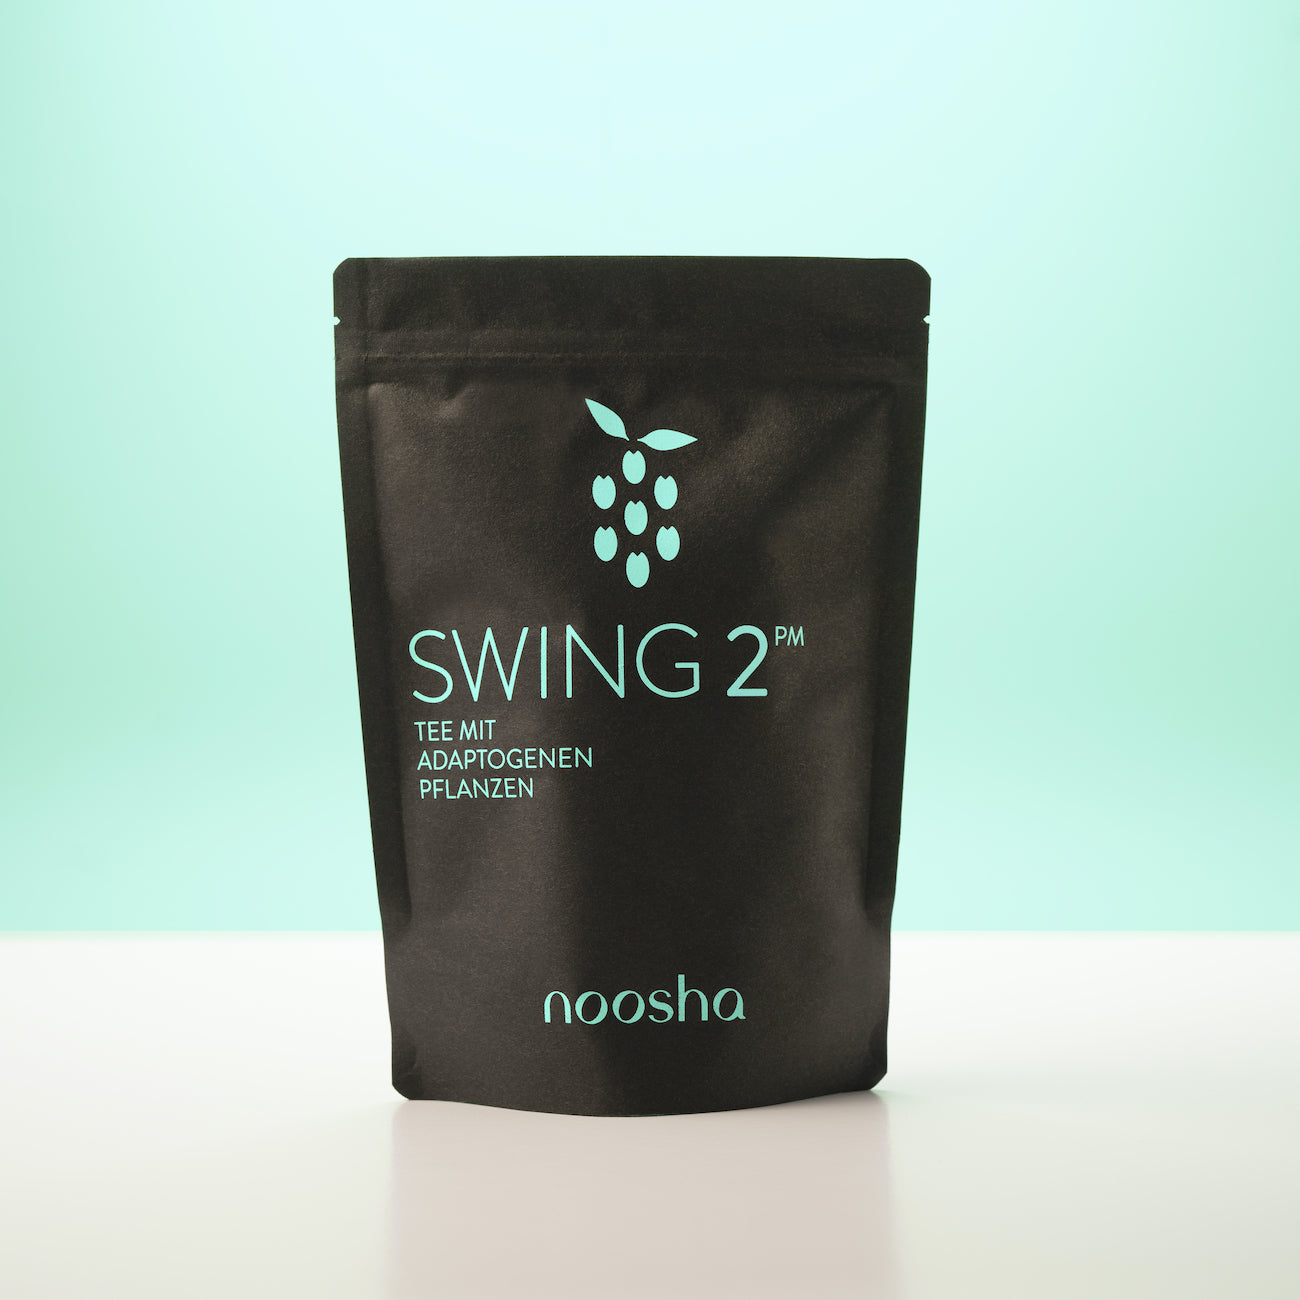 Packaging of SWING 2PM tea made by noosha